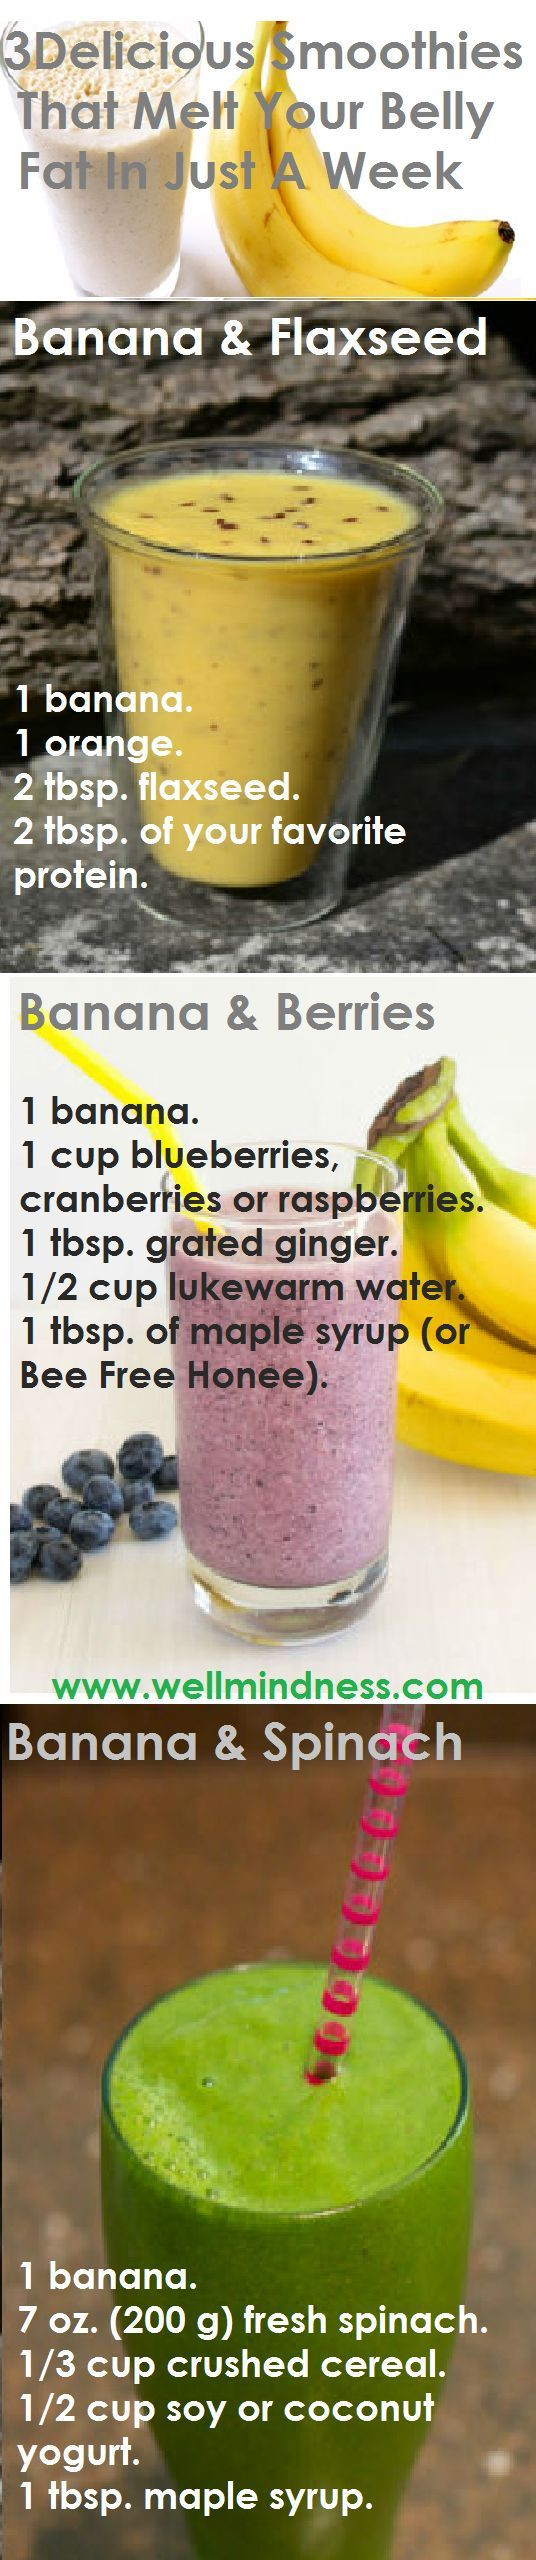 Detox Smoothies To Shed Belly Weight
 These smoothies make a real invasion of belly fat in the